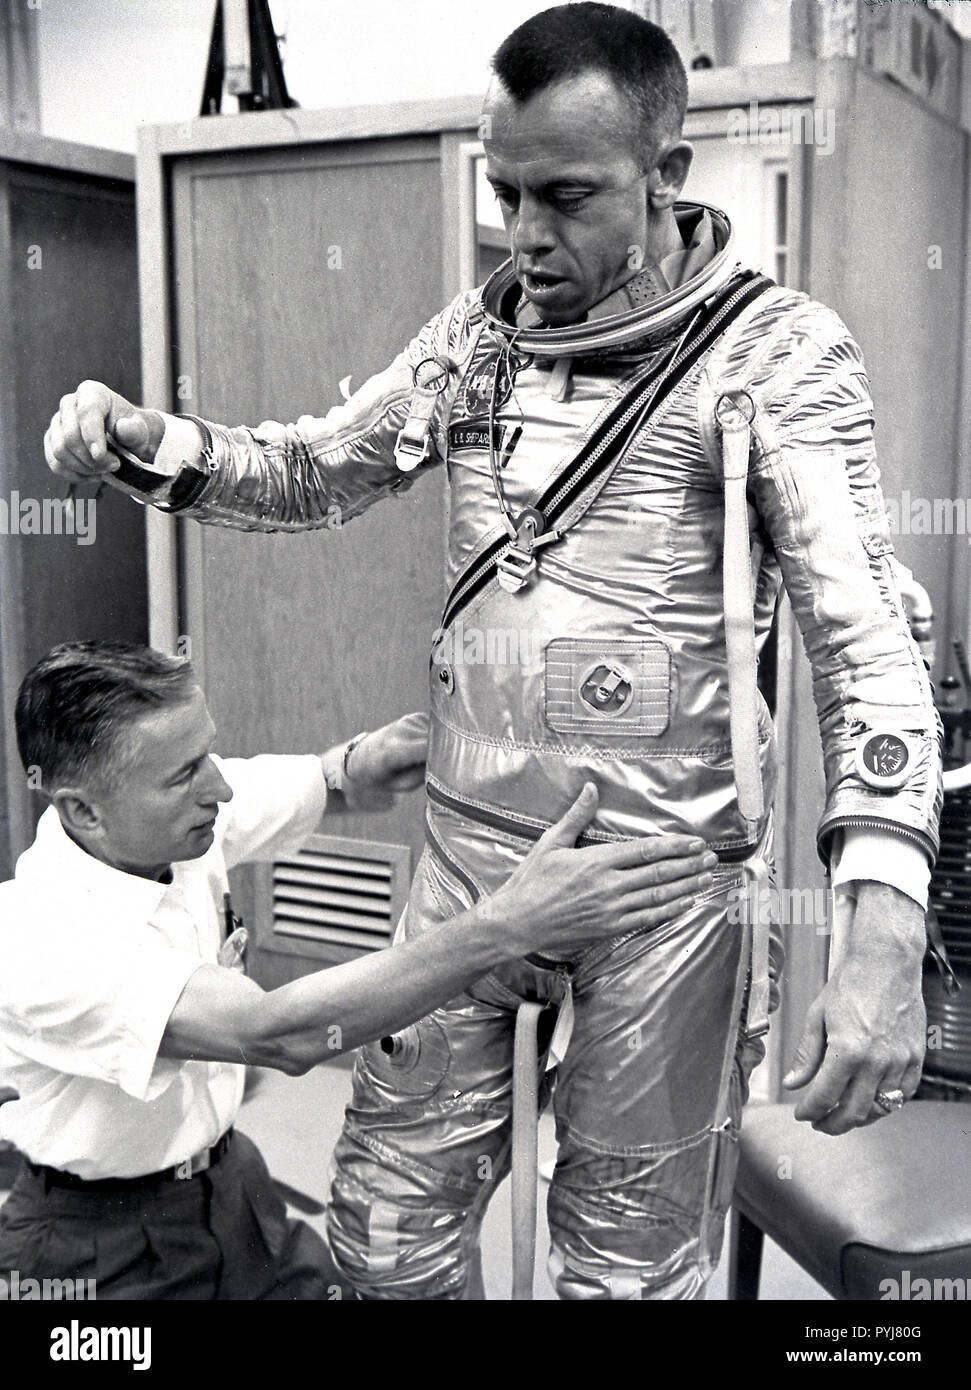 Astronaut Shepard,Alan fitted with Space suit MR-3 ( Mercury-Redstone) Freedom 7. Stock Photo